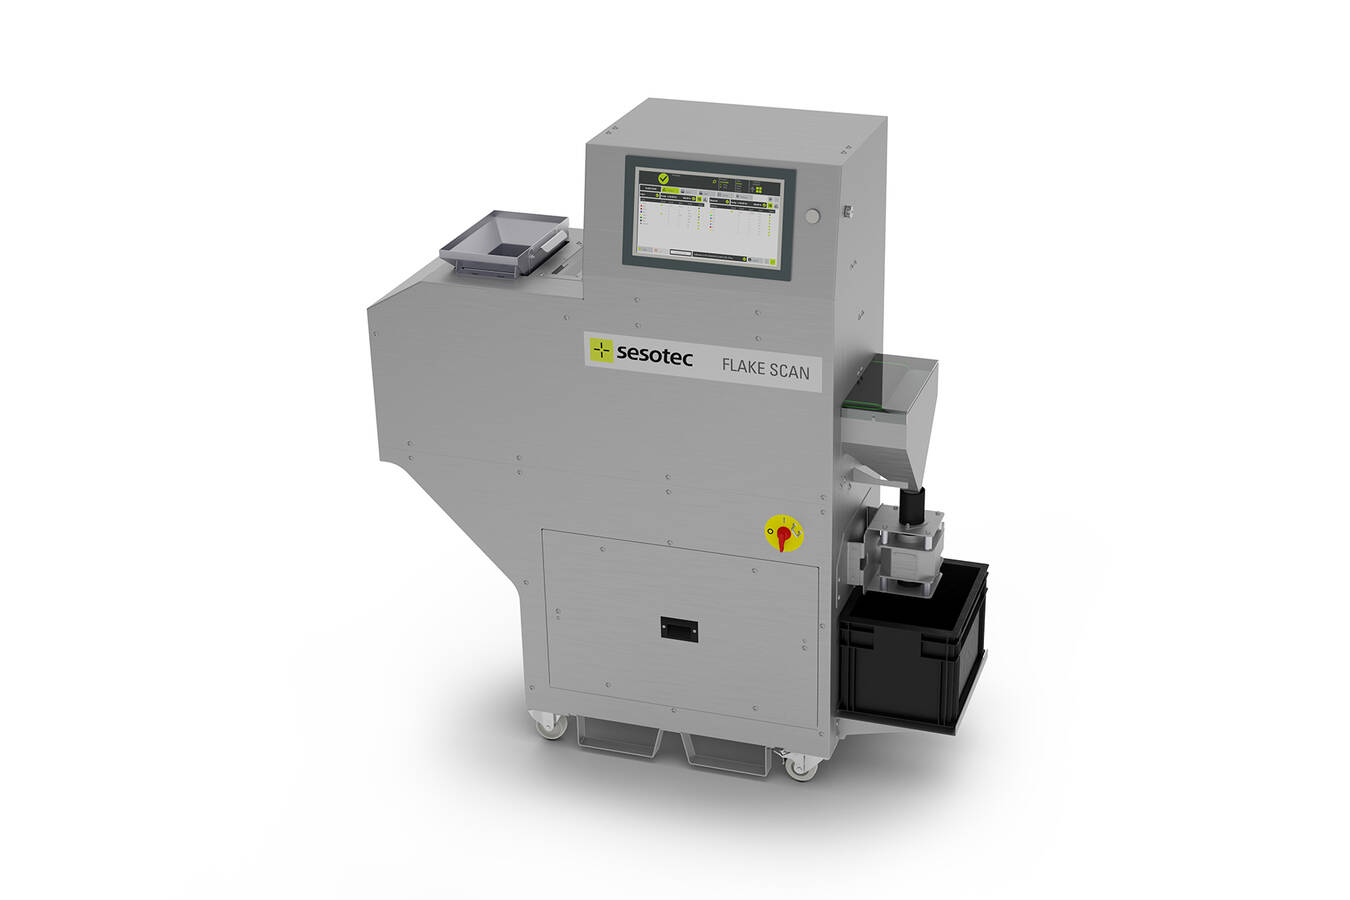 Quality analysis of plastic flakes and regrind within minutes Sesotec’s Flake scan analysis system saves time and money